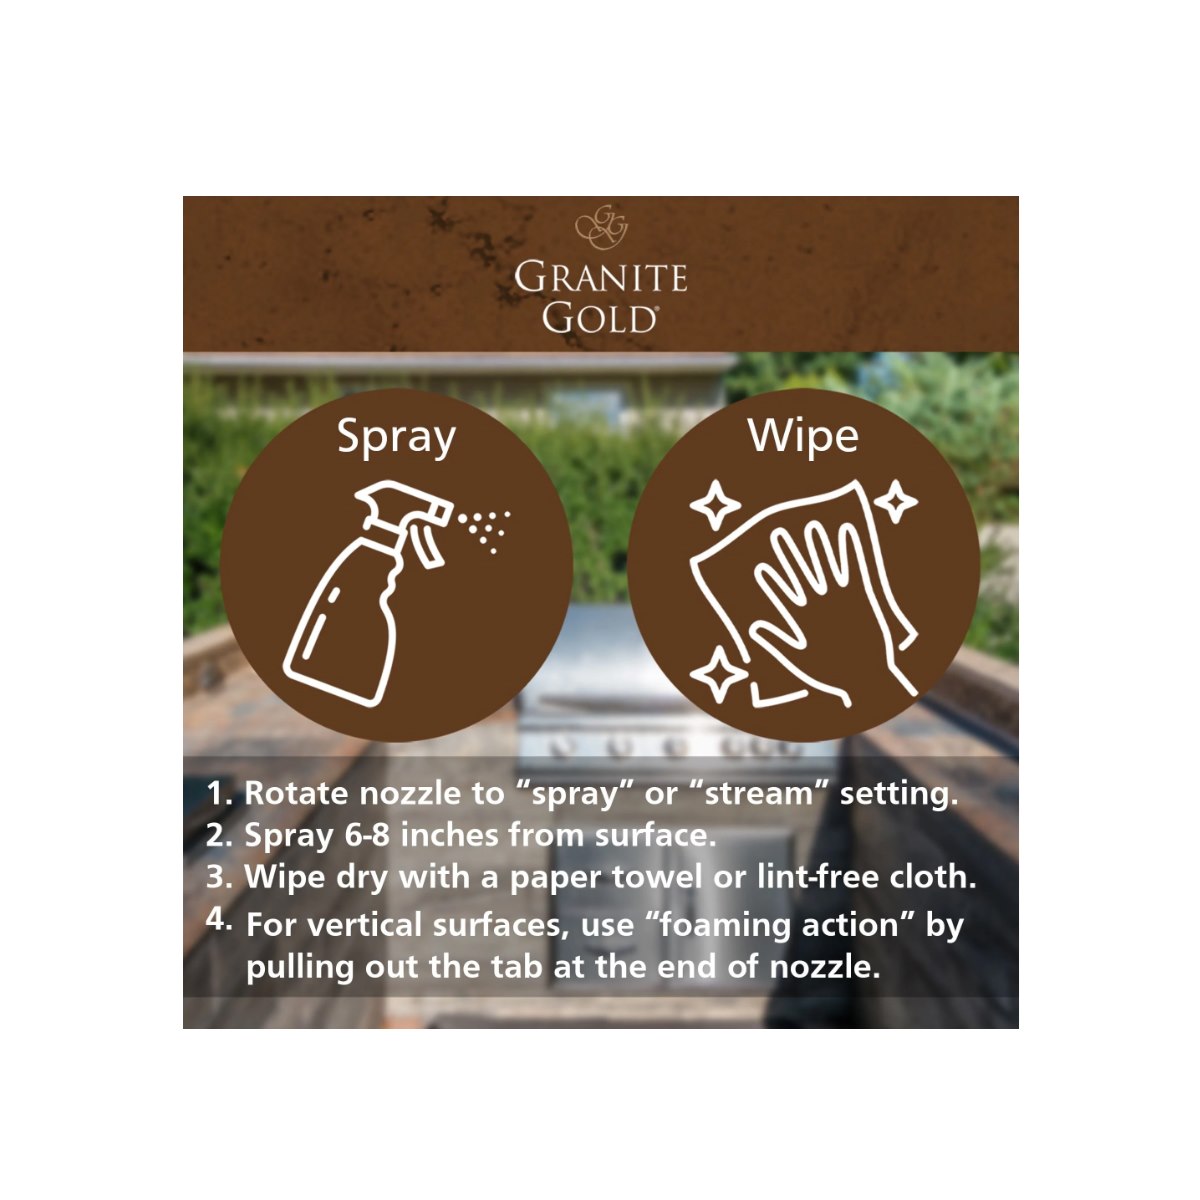 Granite Gold Outdoor Stone Cleaner Instructions